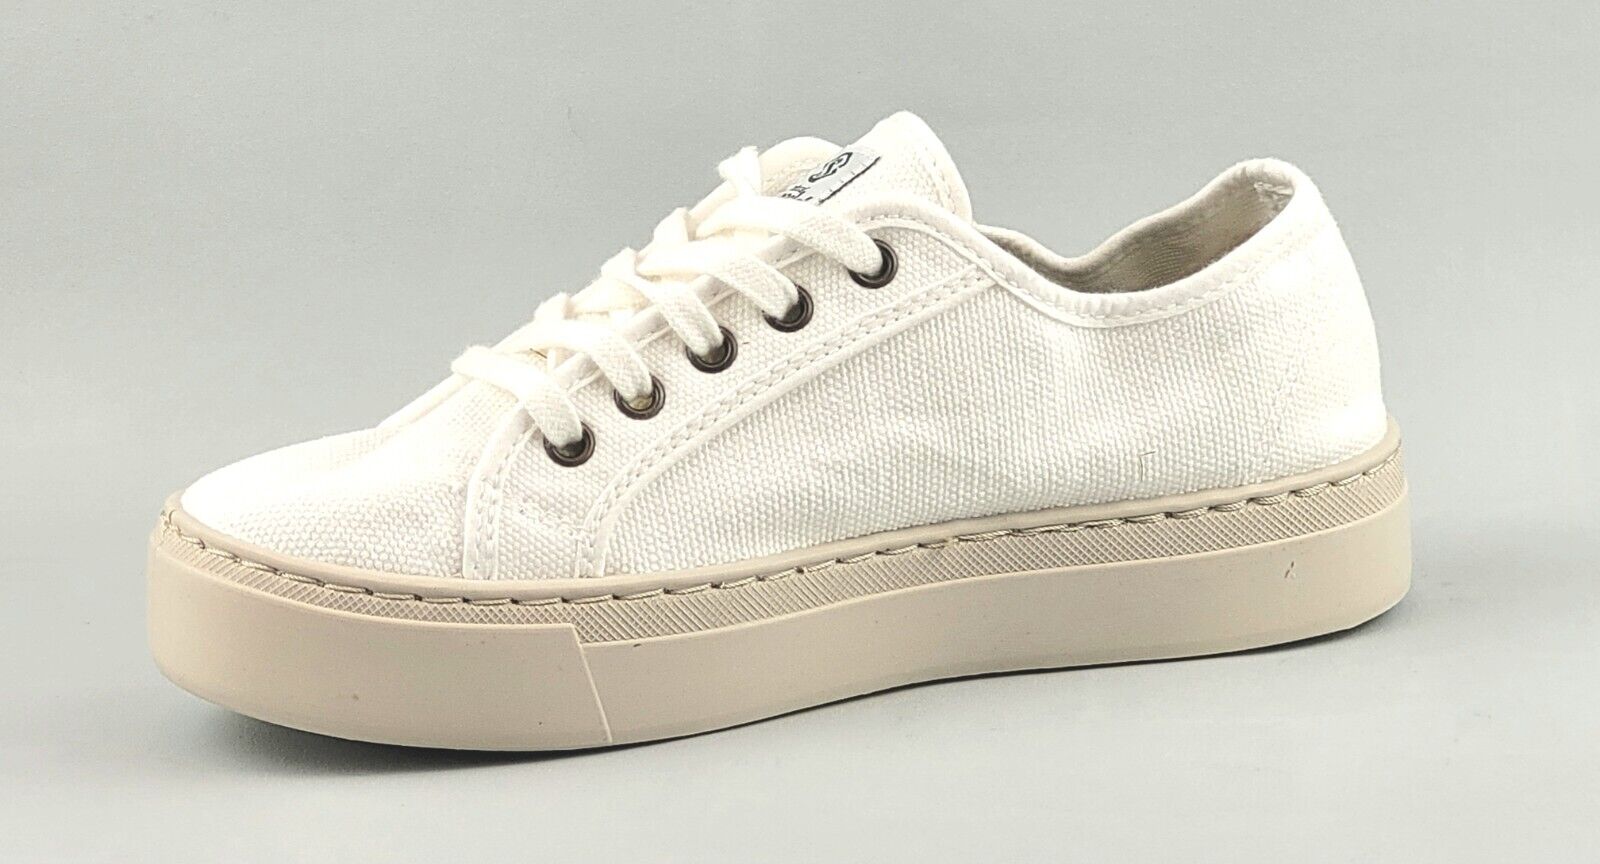 Off white canvas sneaker with thick rubber sole